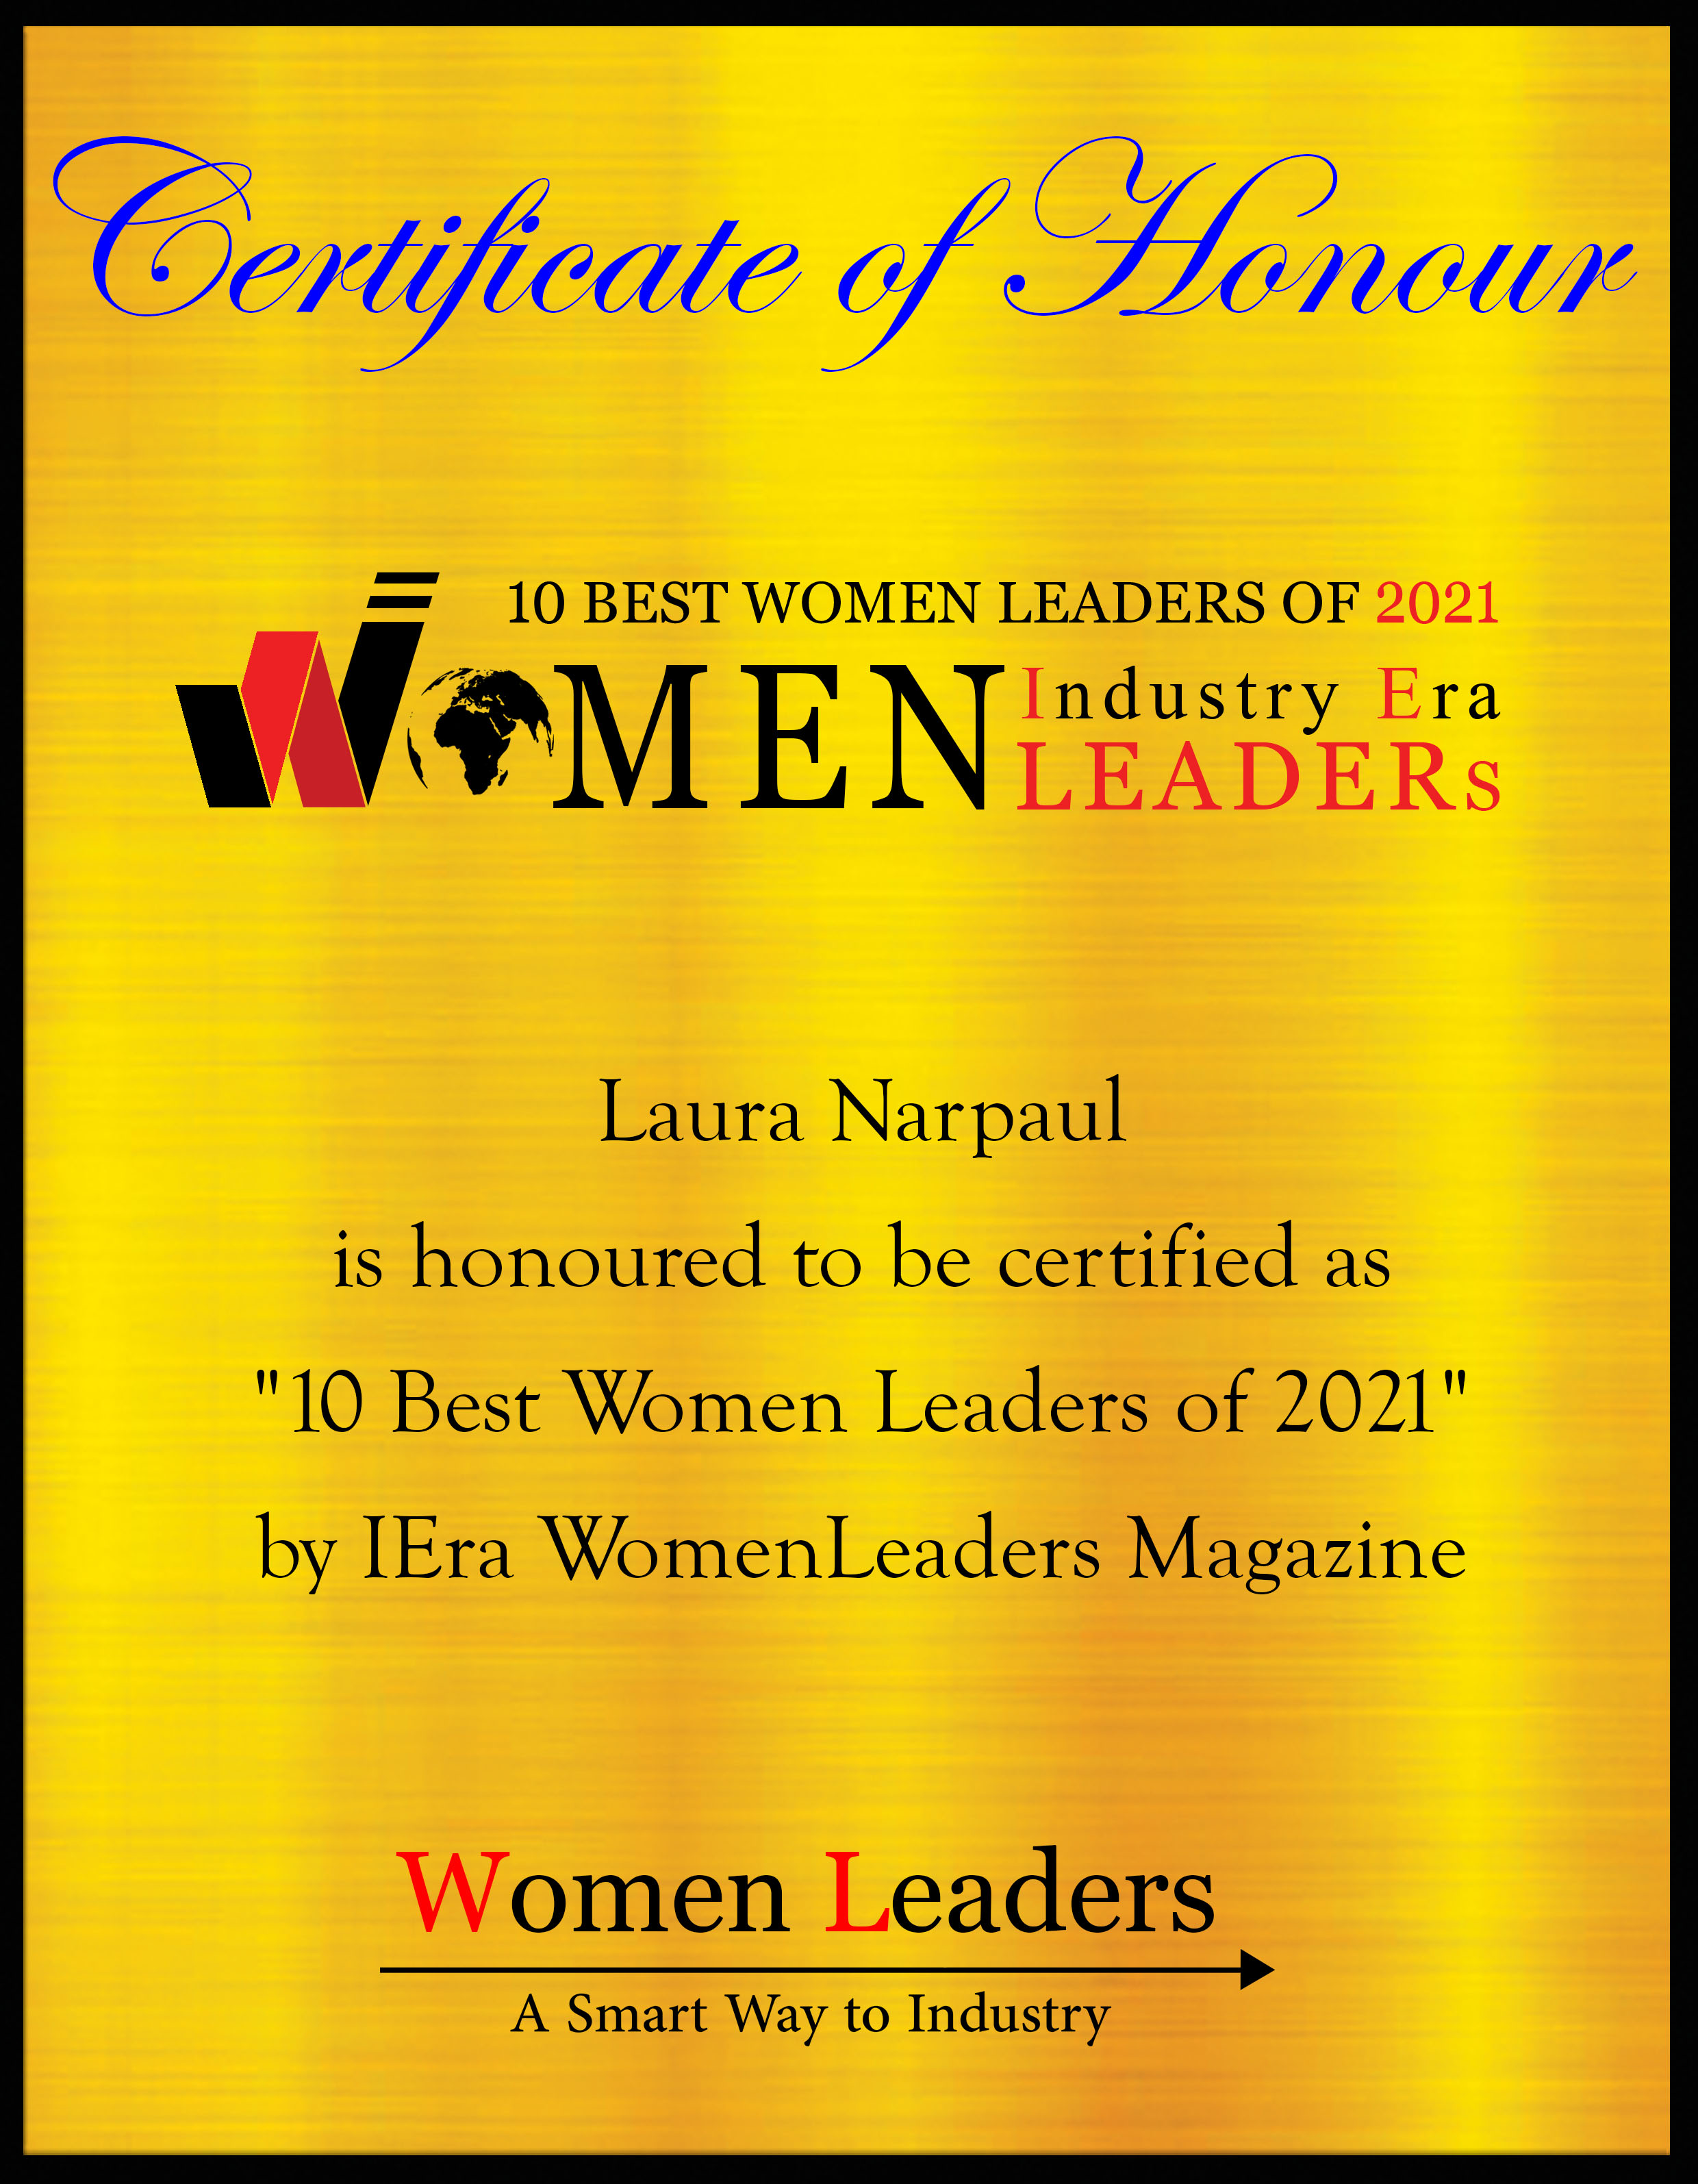 Laura Narpaul President & Co-Founder of Mach1 Services, Best WomenLeaders of 2021